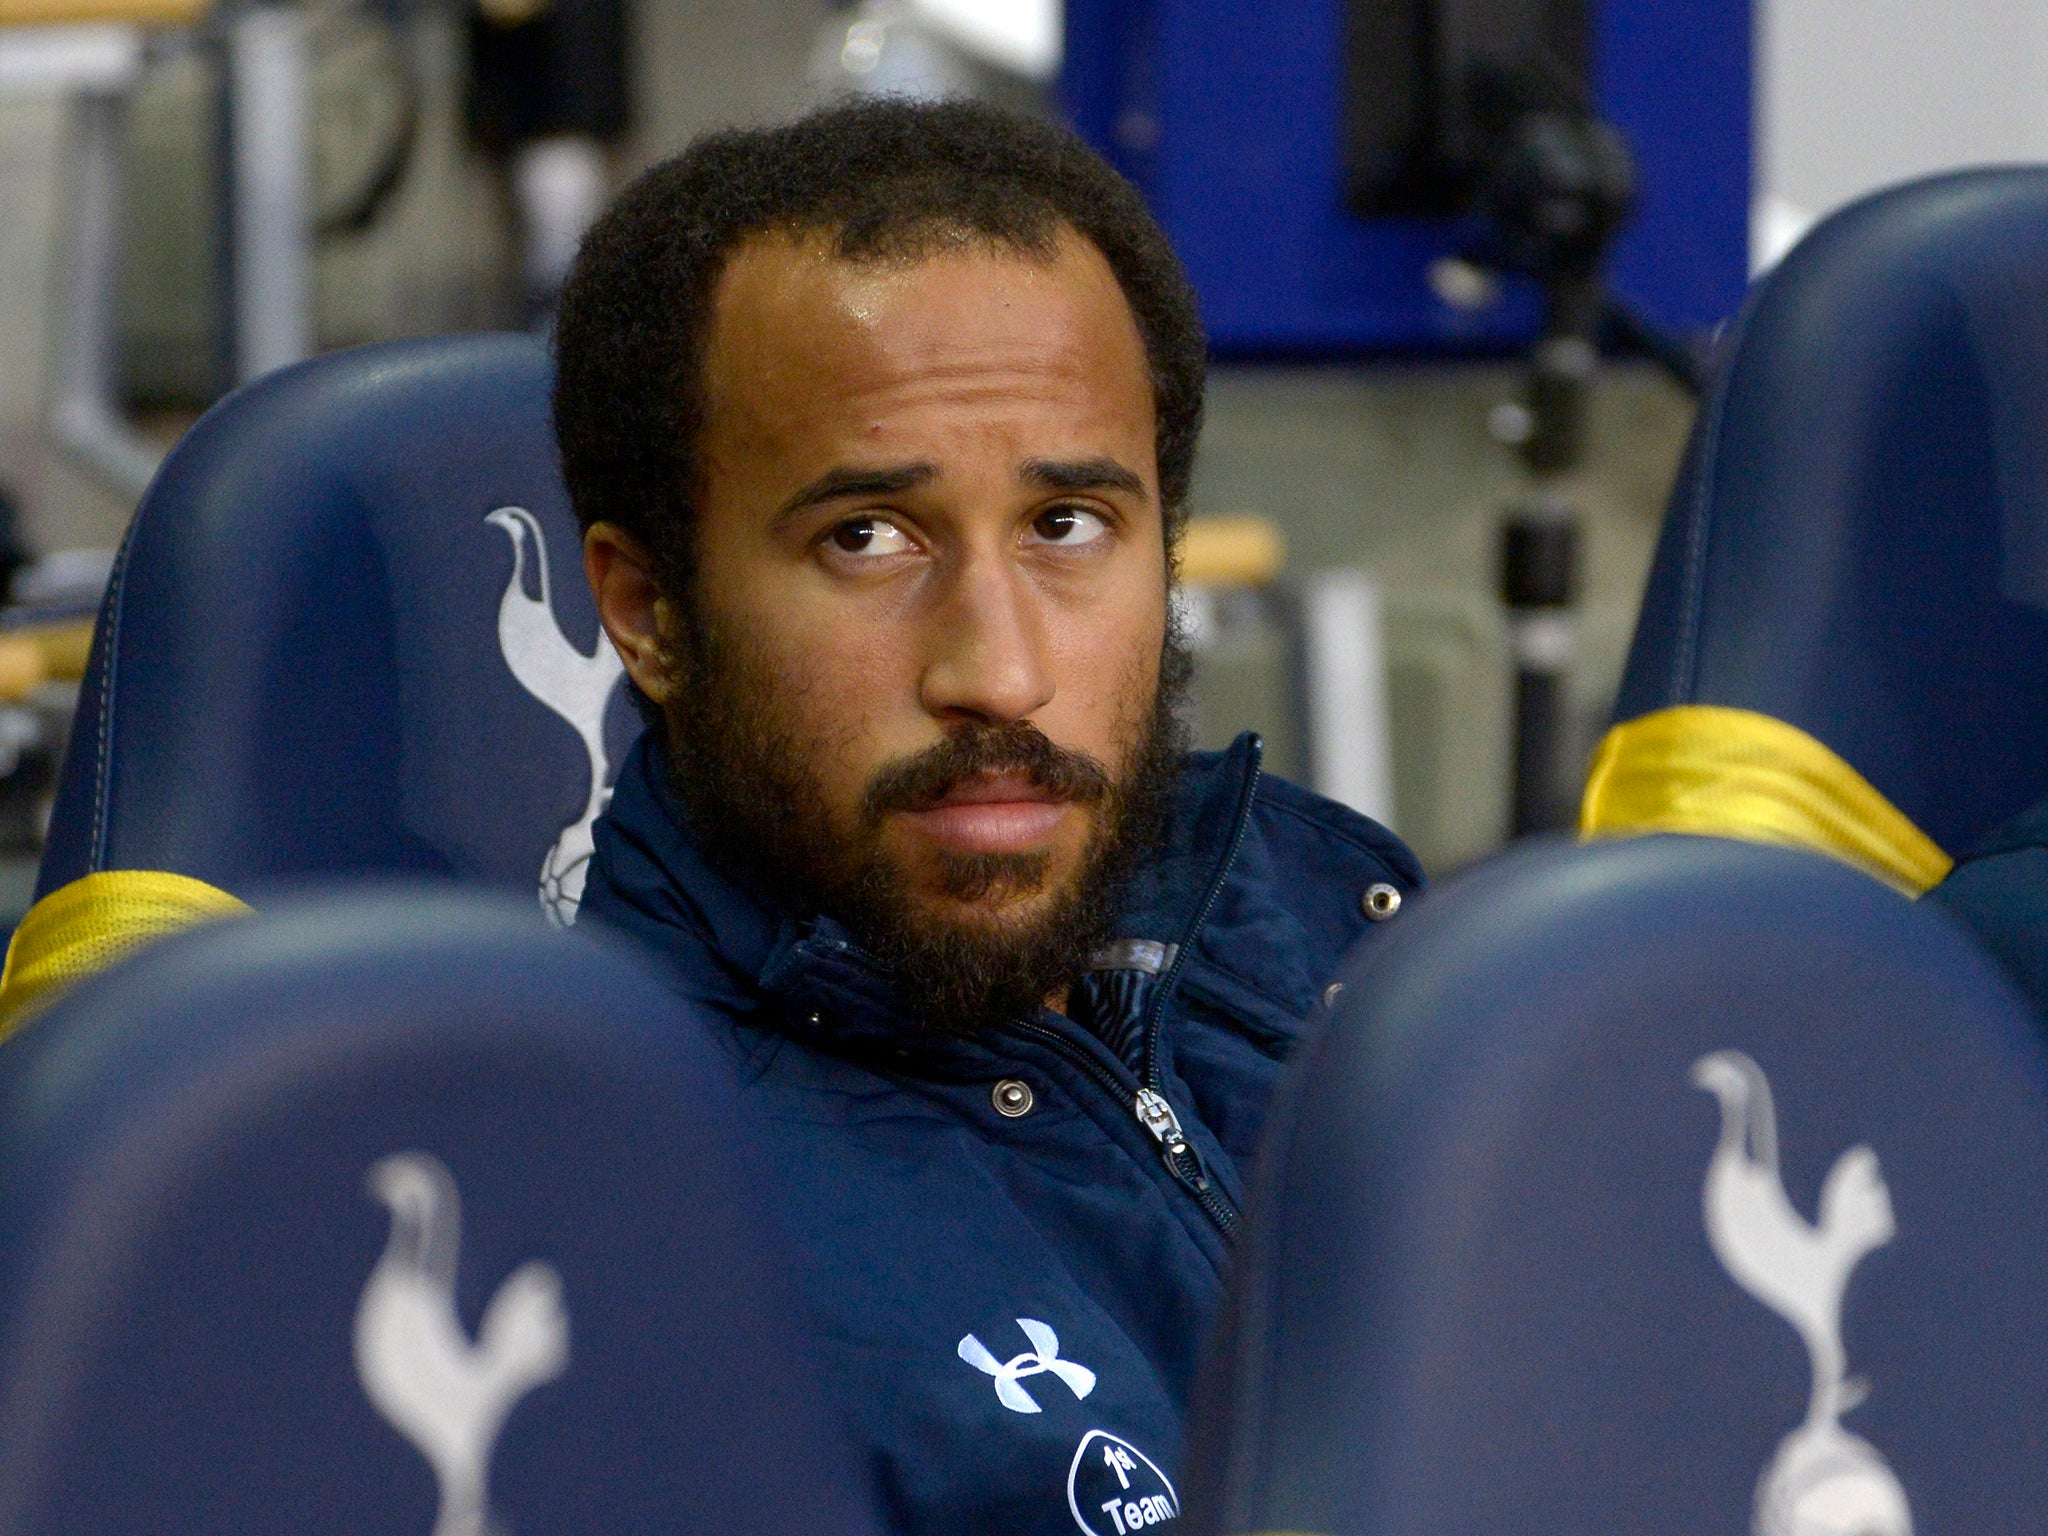 Townsend left Tottenham under a cloud after a row with the fitness instructor